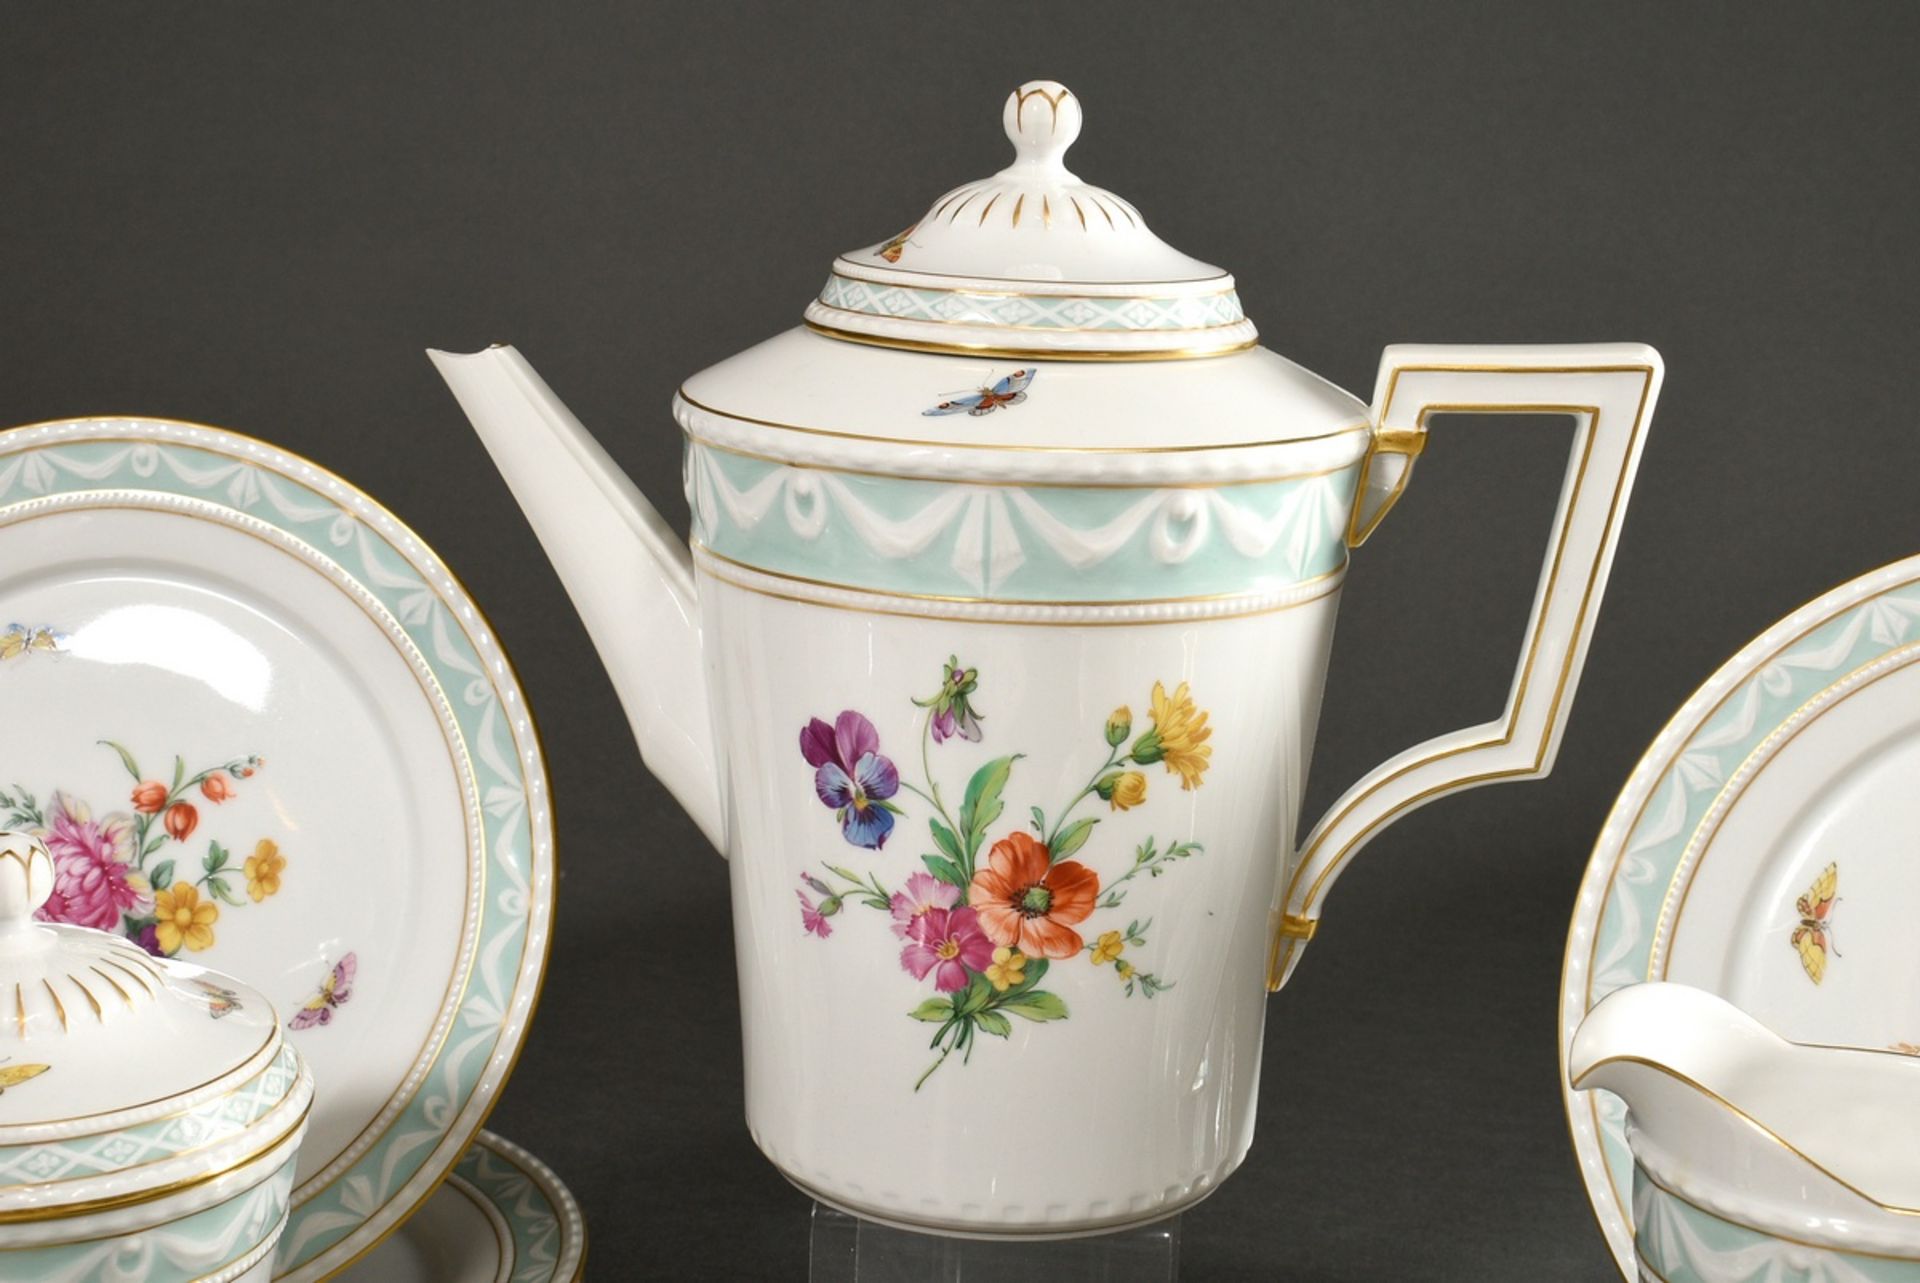 15 Pieces KPM coffee service "Kurland" with flowers and insects, gold staffage and turquoise frieze - Image 8 of 10